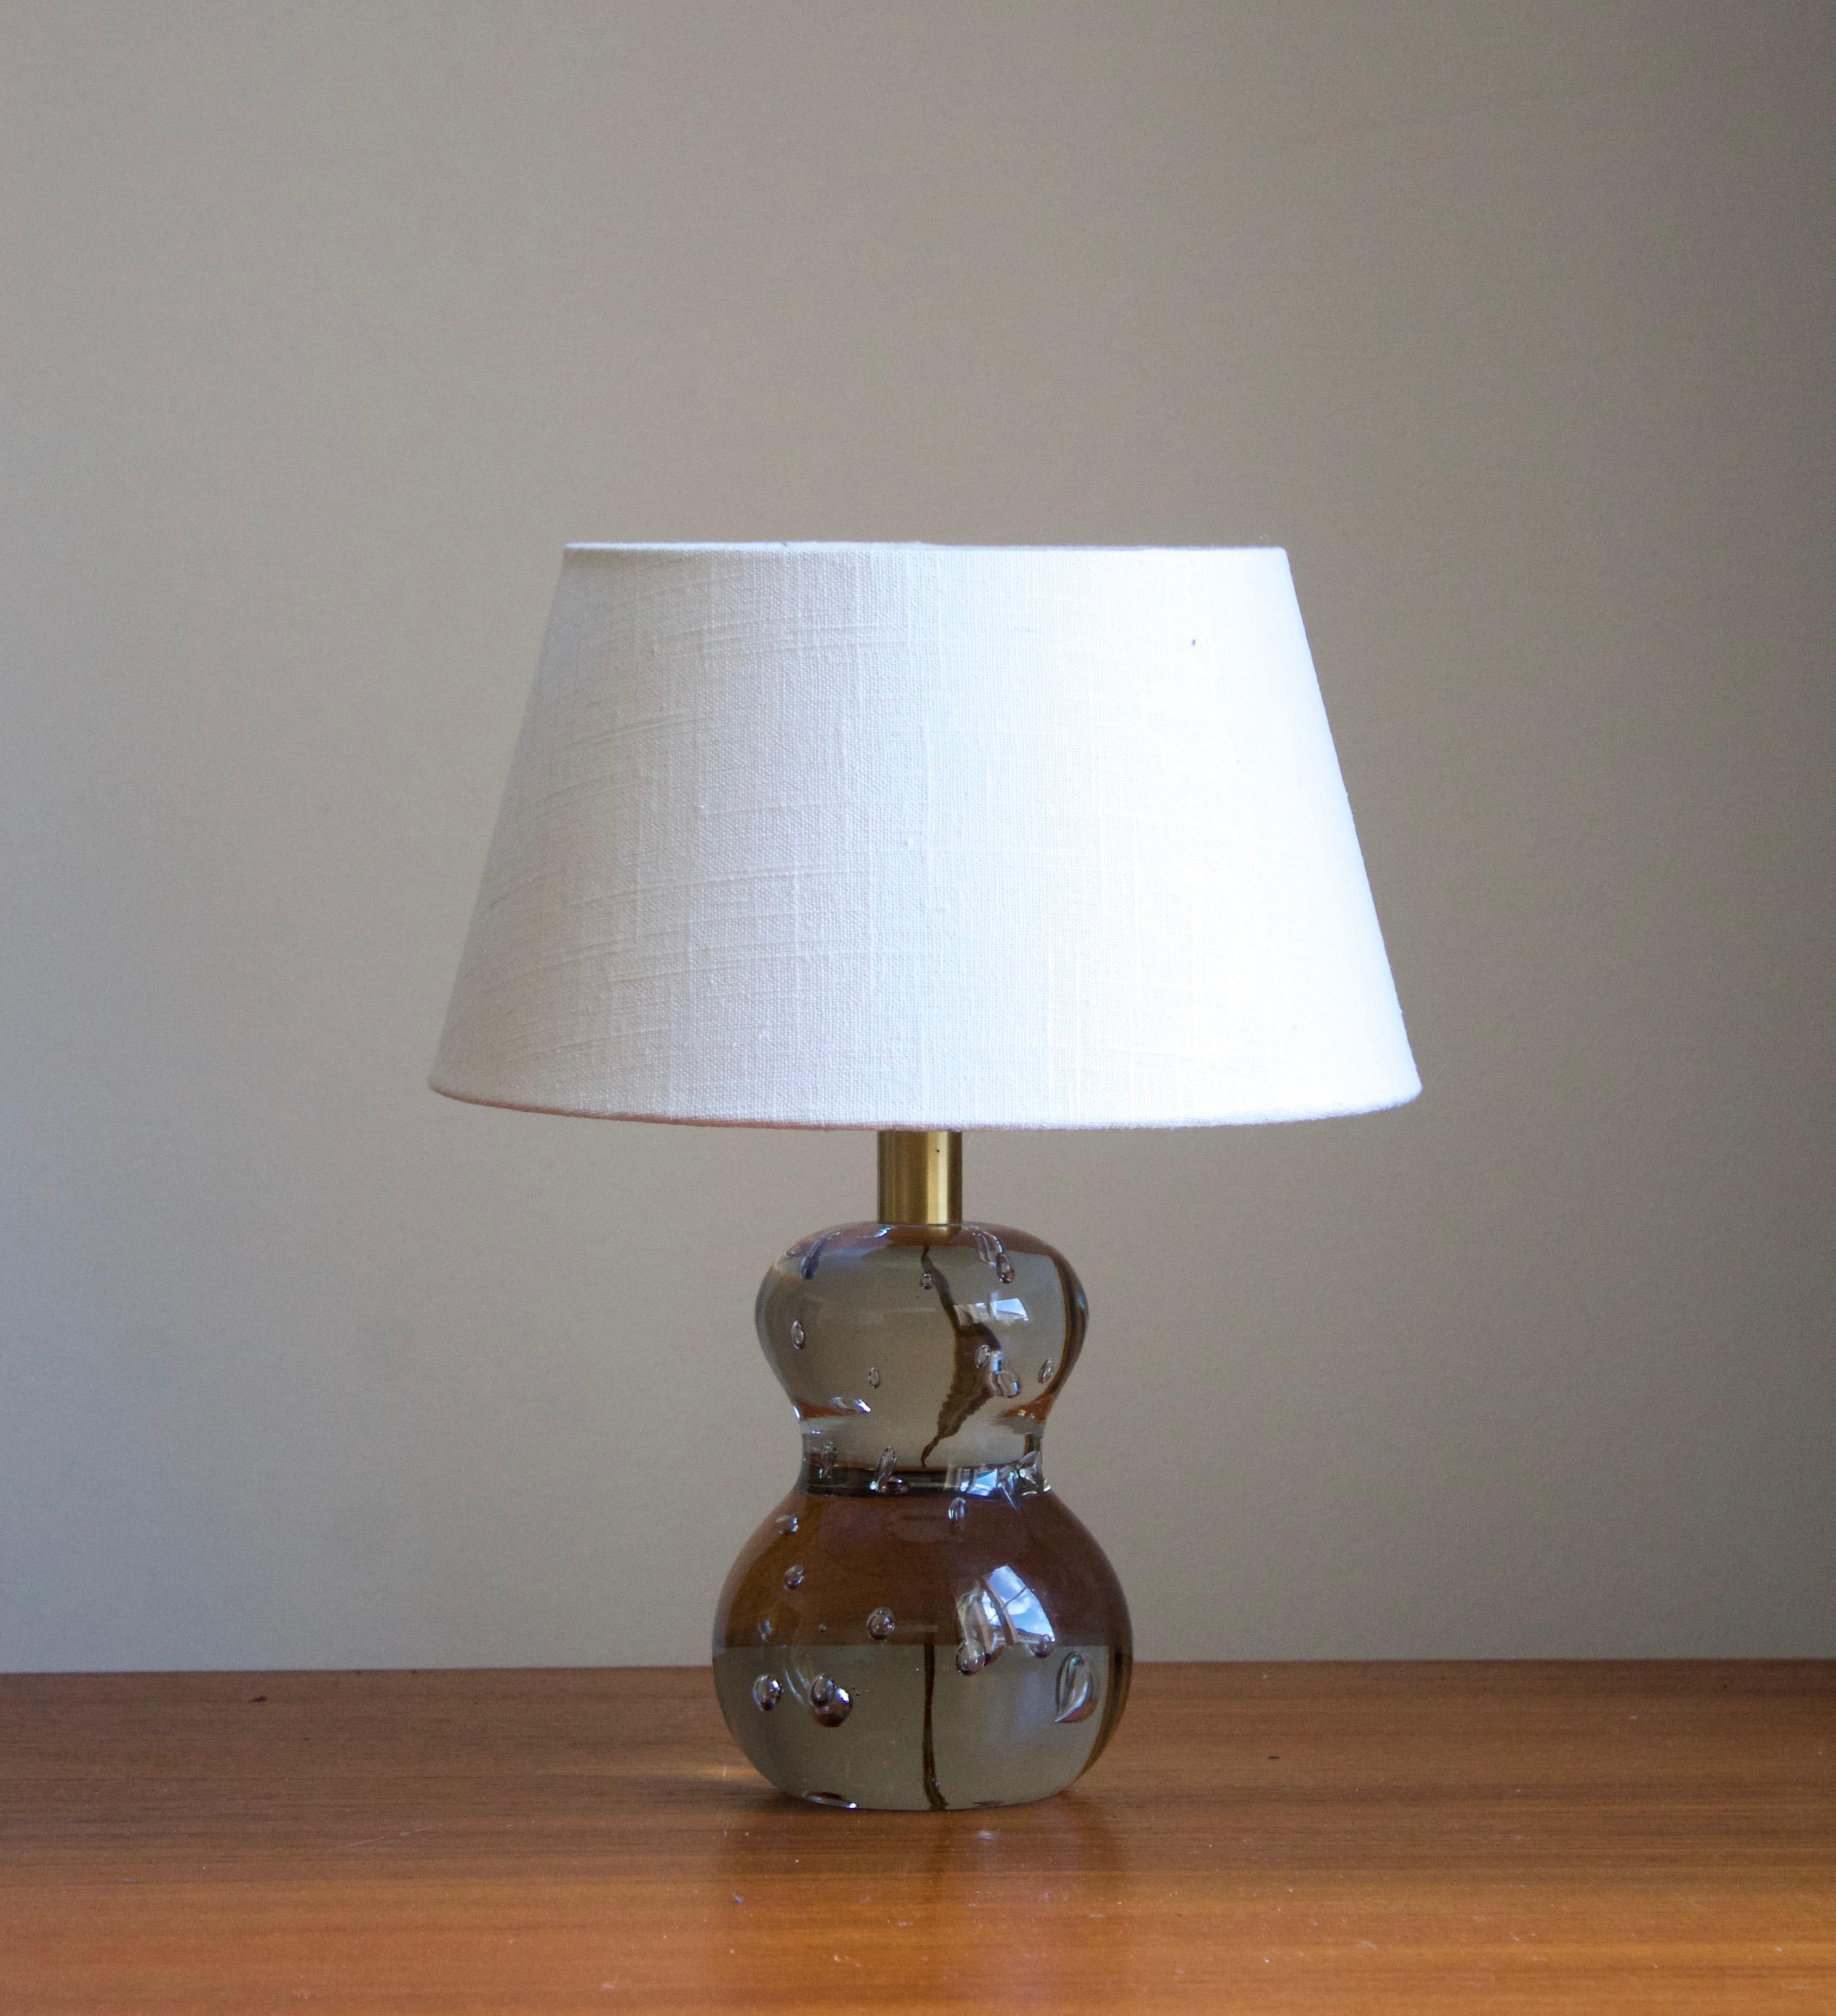 An early and sizable version table lamp by Josef Frank, in brass and studio glass from Reijmyre Glasbruk. Produced by Svenskt Tenn, 1950s.

Stated dimensions excluding lampshade. Lampshade is not included in purchase.

Other lighting designers